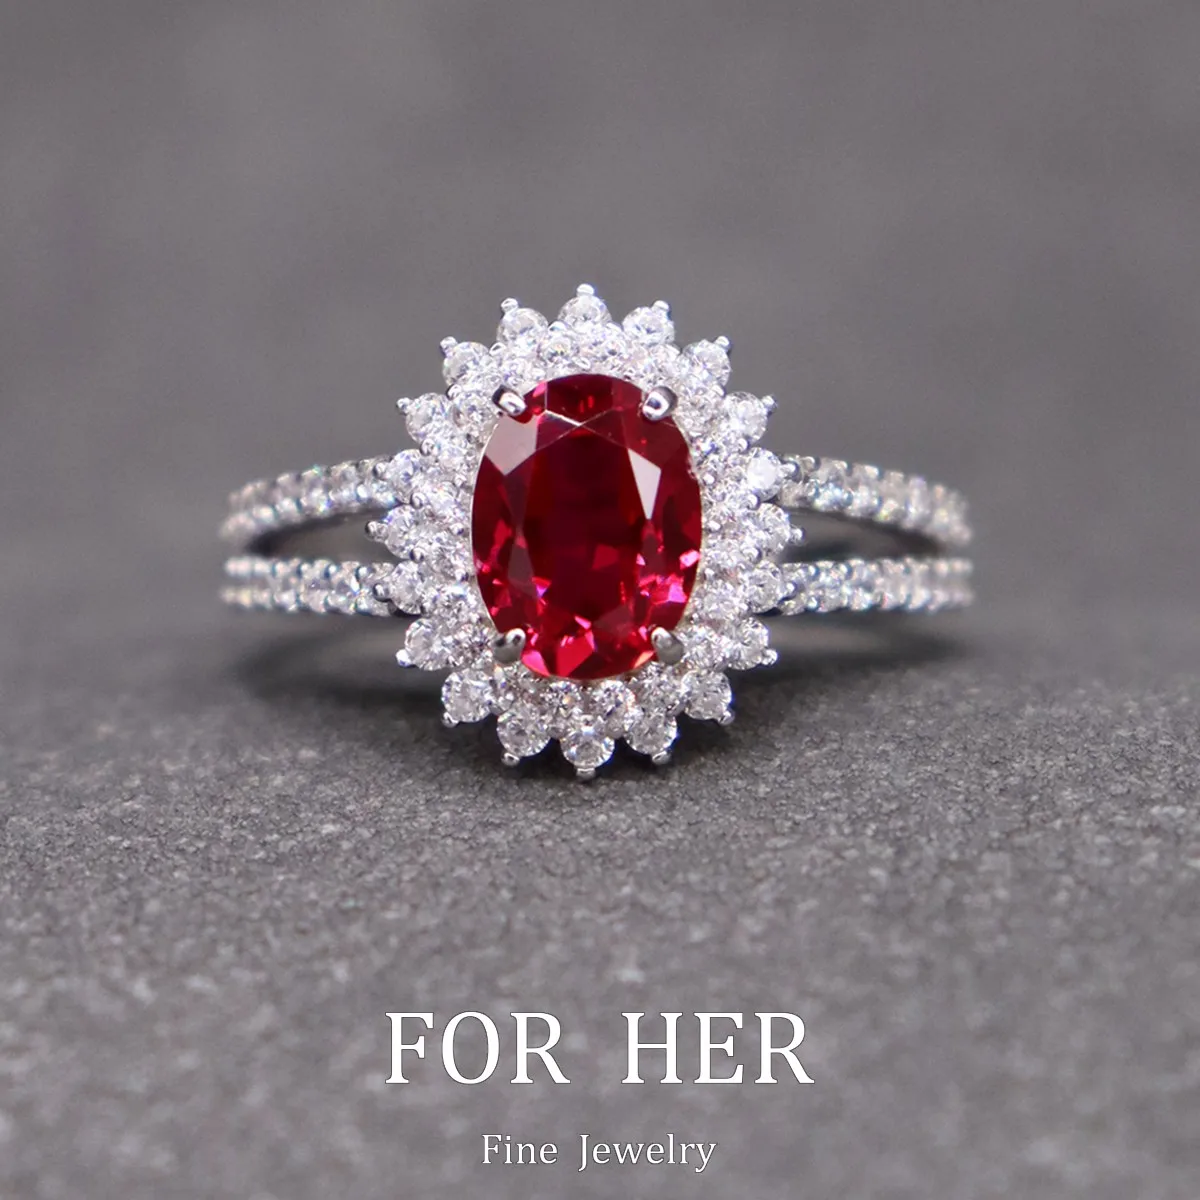 ForHer Jewelry Design Lab Grown Ruby Ring Princess Women's S925 Sliver Pigeon Blood Oval Cut Fashion Accessories